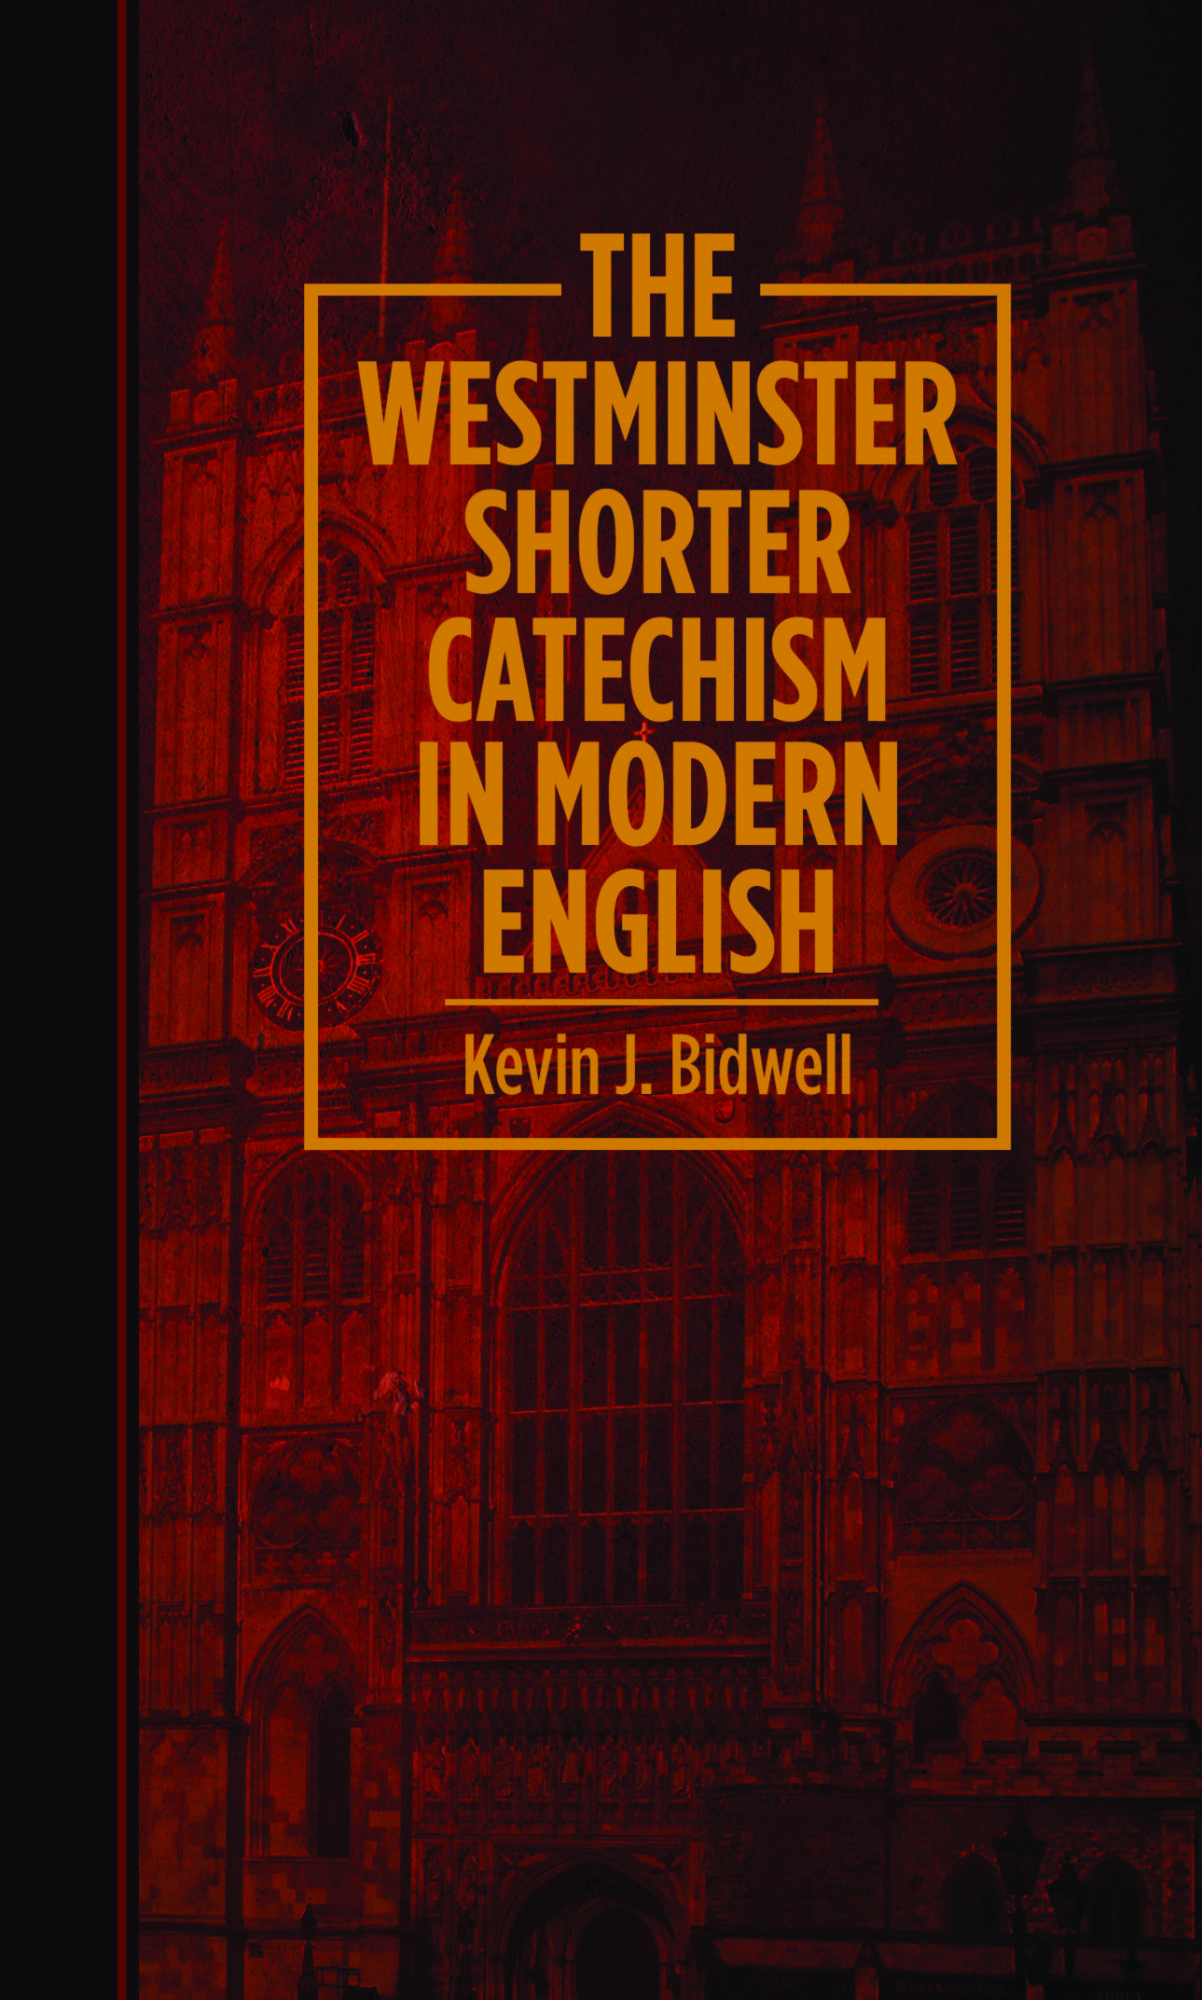 Book Notice: THE WESTMINSTER SHORTER CATECHISM, by Kevin Bidwell